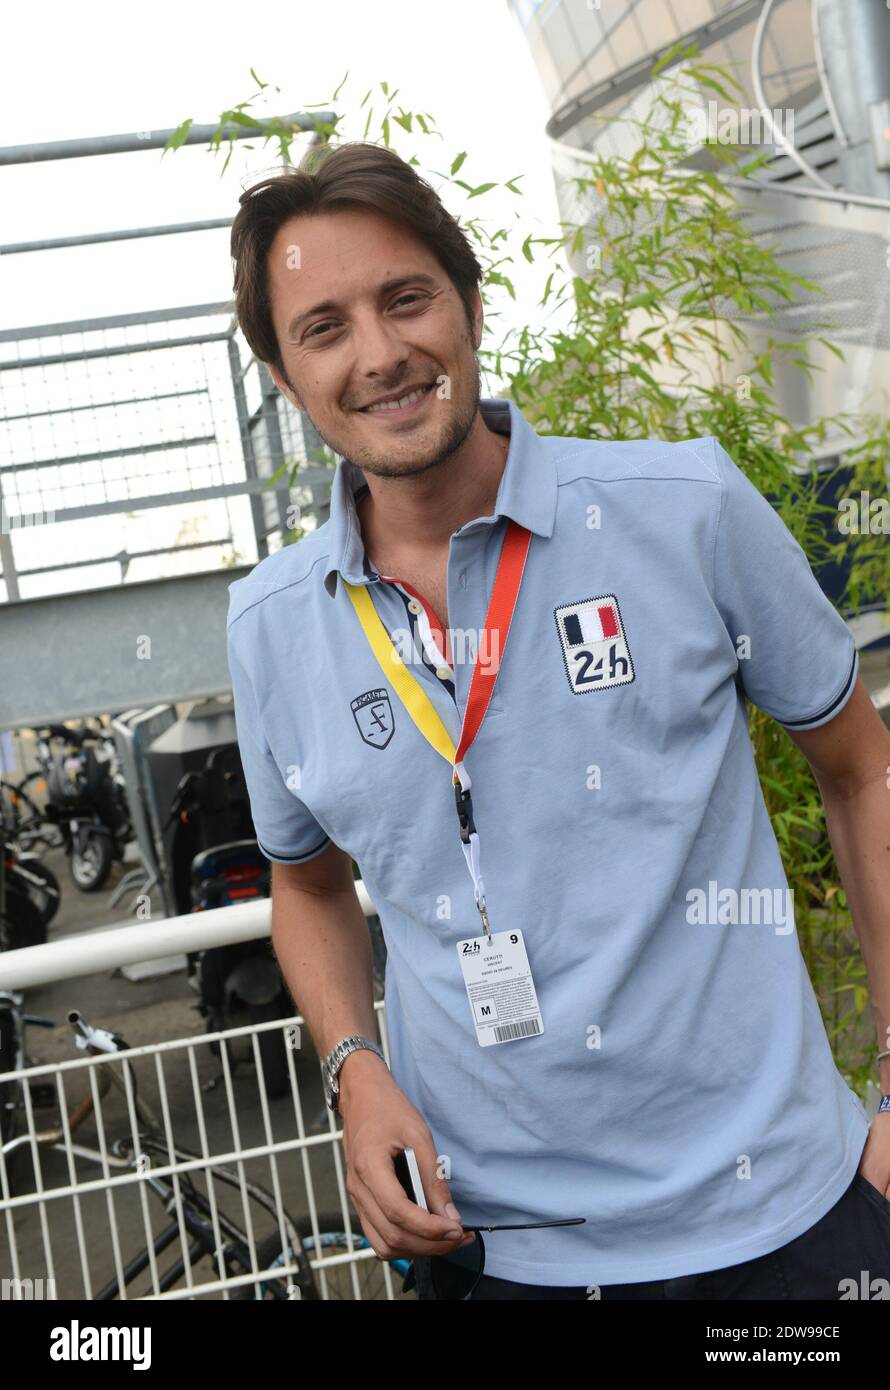 Vincent Cerutti during the 2014 scrutineering and qualifying sessions of the 24 Hours of Le Mans from June the 8th to the 12th 2014, at Le Mans circuit, France on June 11, 2014. Photo by Guy Durand/ABACAPRESS.COM Stock Photo